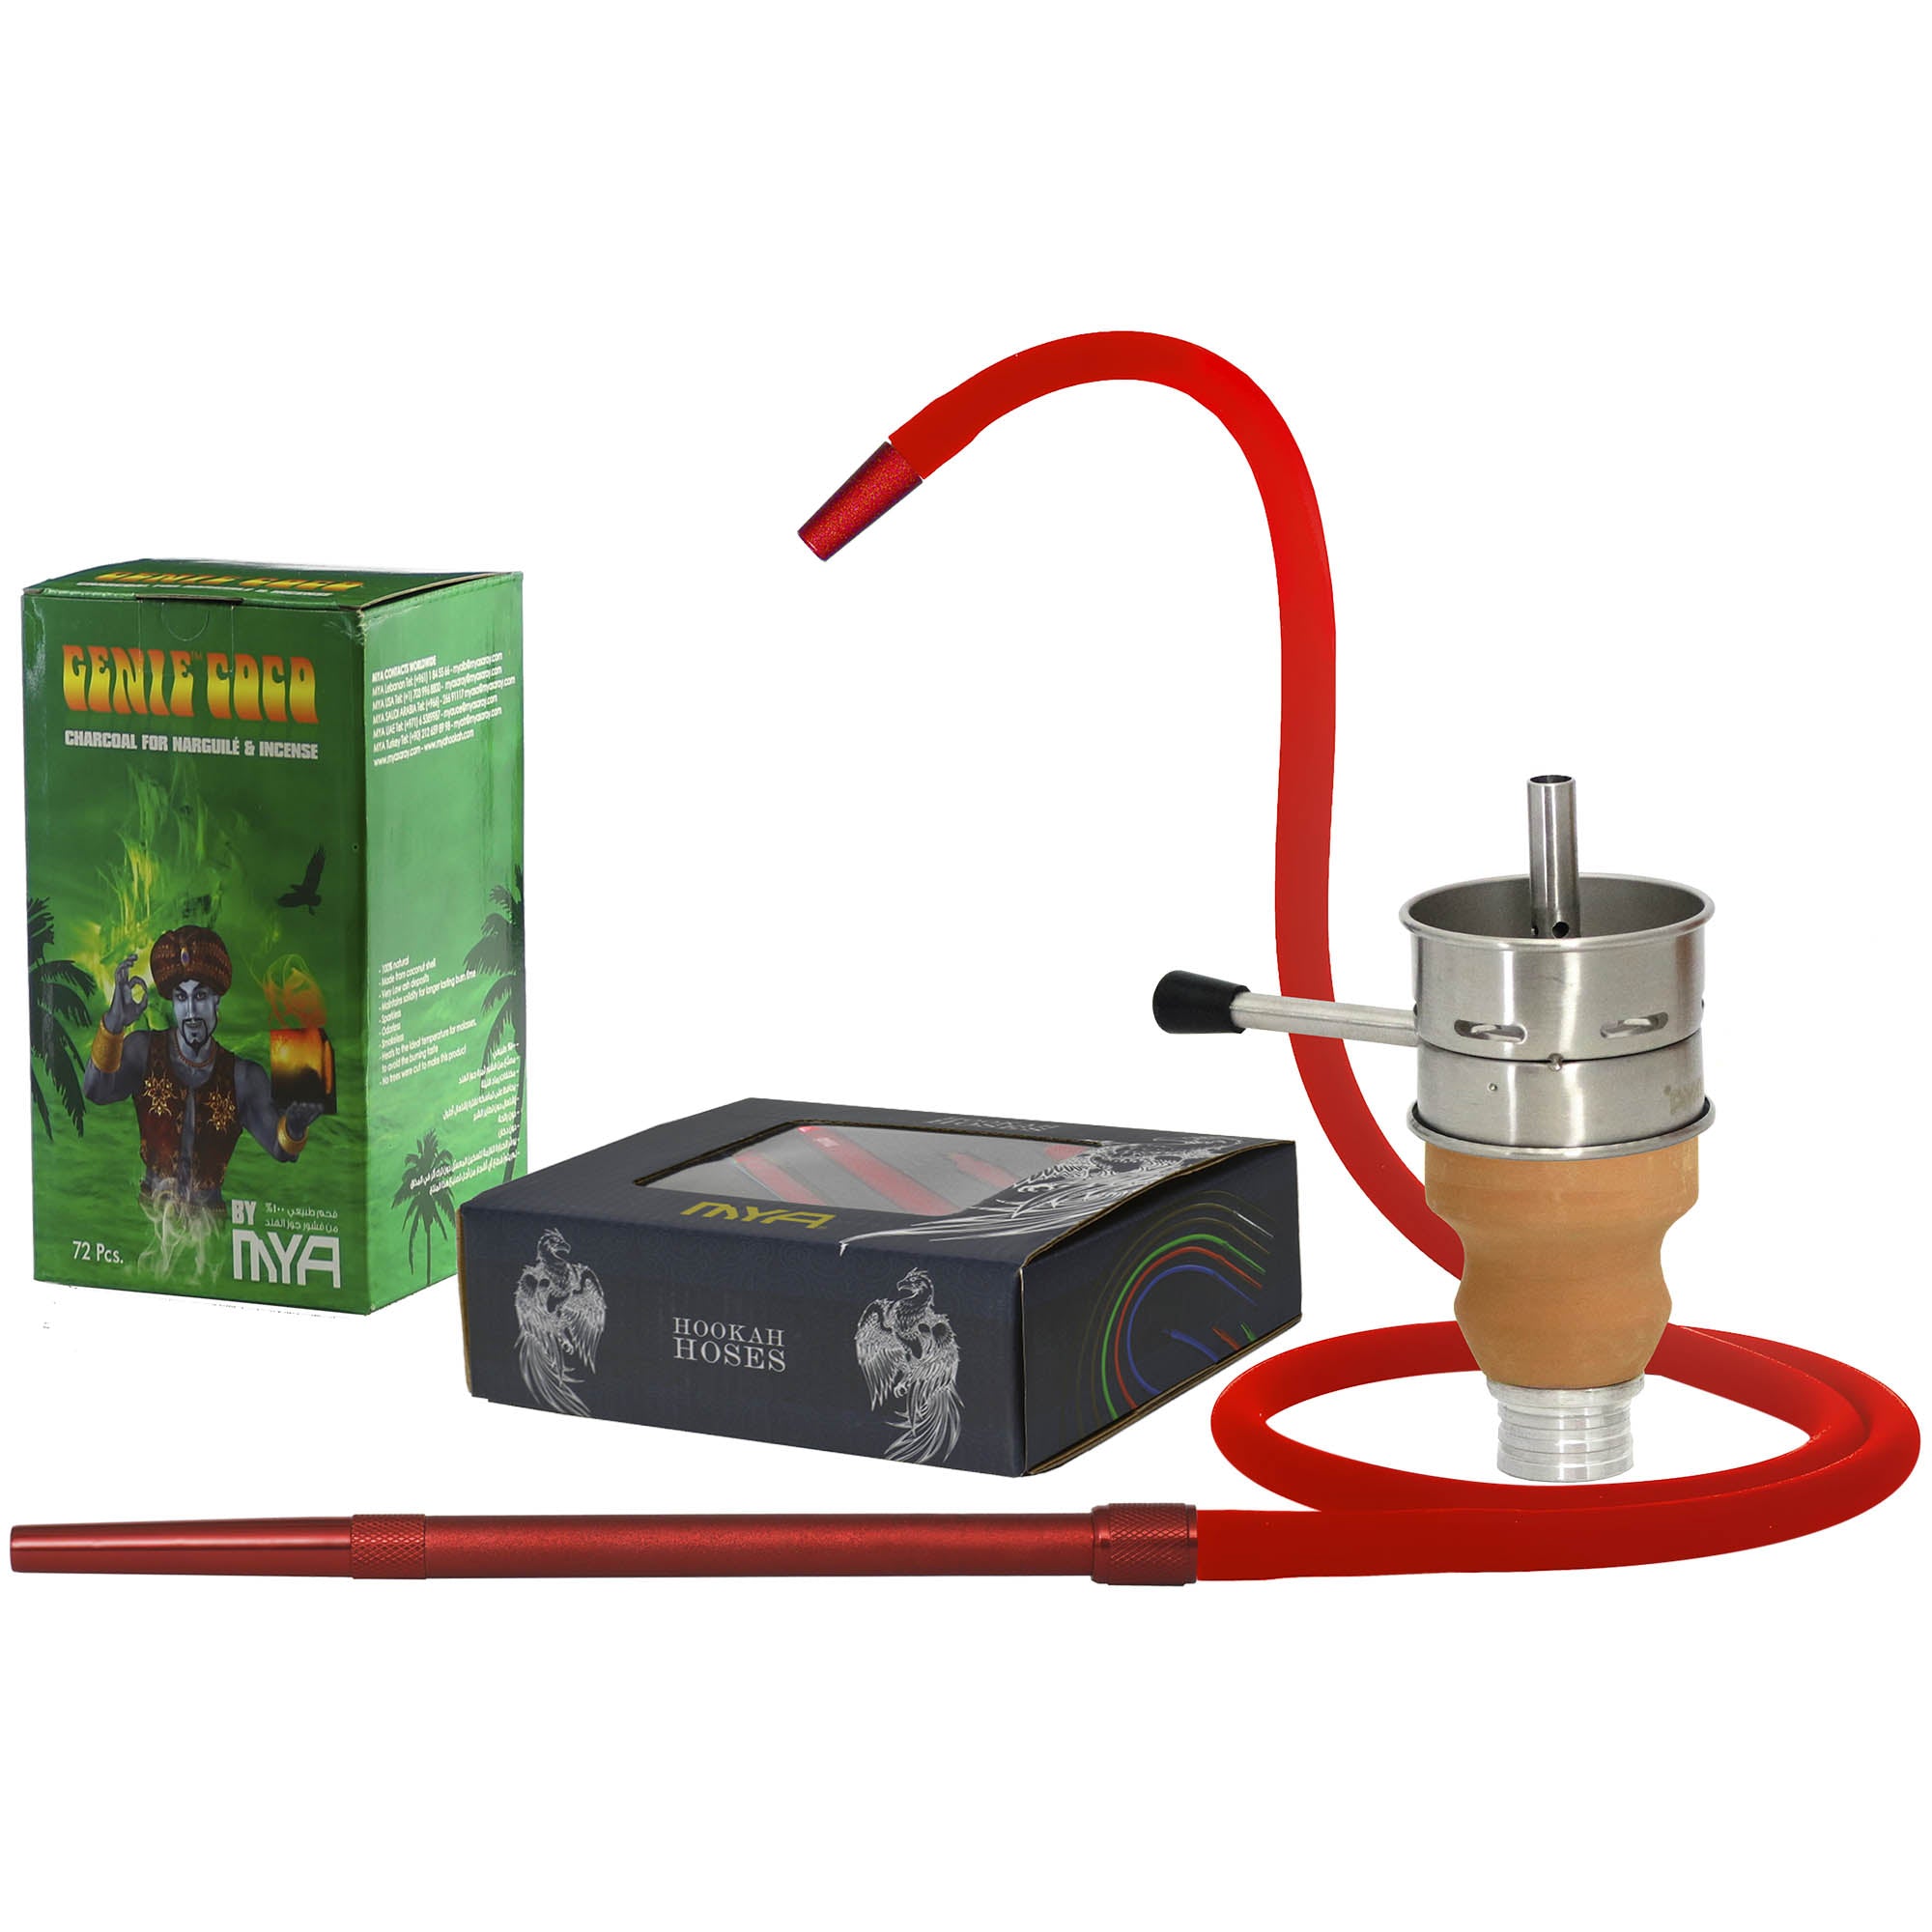 Accessories set includes Green Genie Coco 72 pieces charcoal, red 668 hose and a Fornello +980L Set #color_red